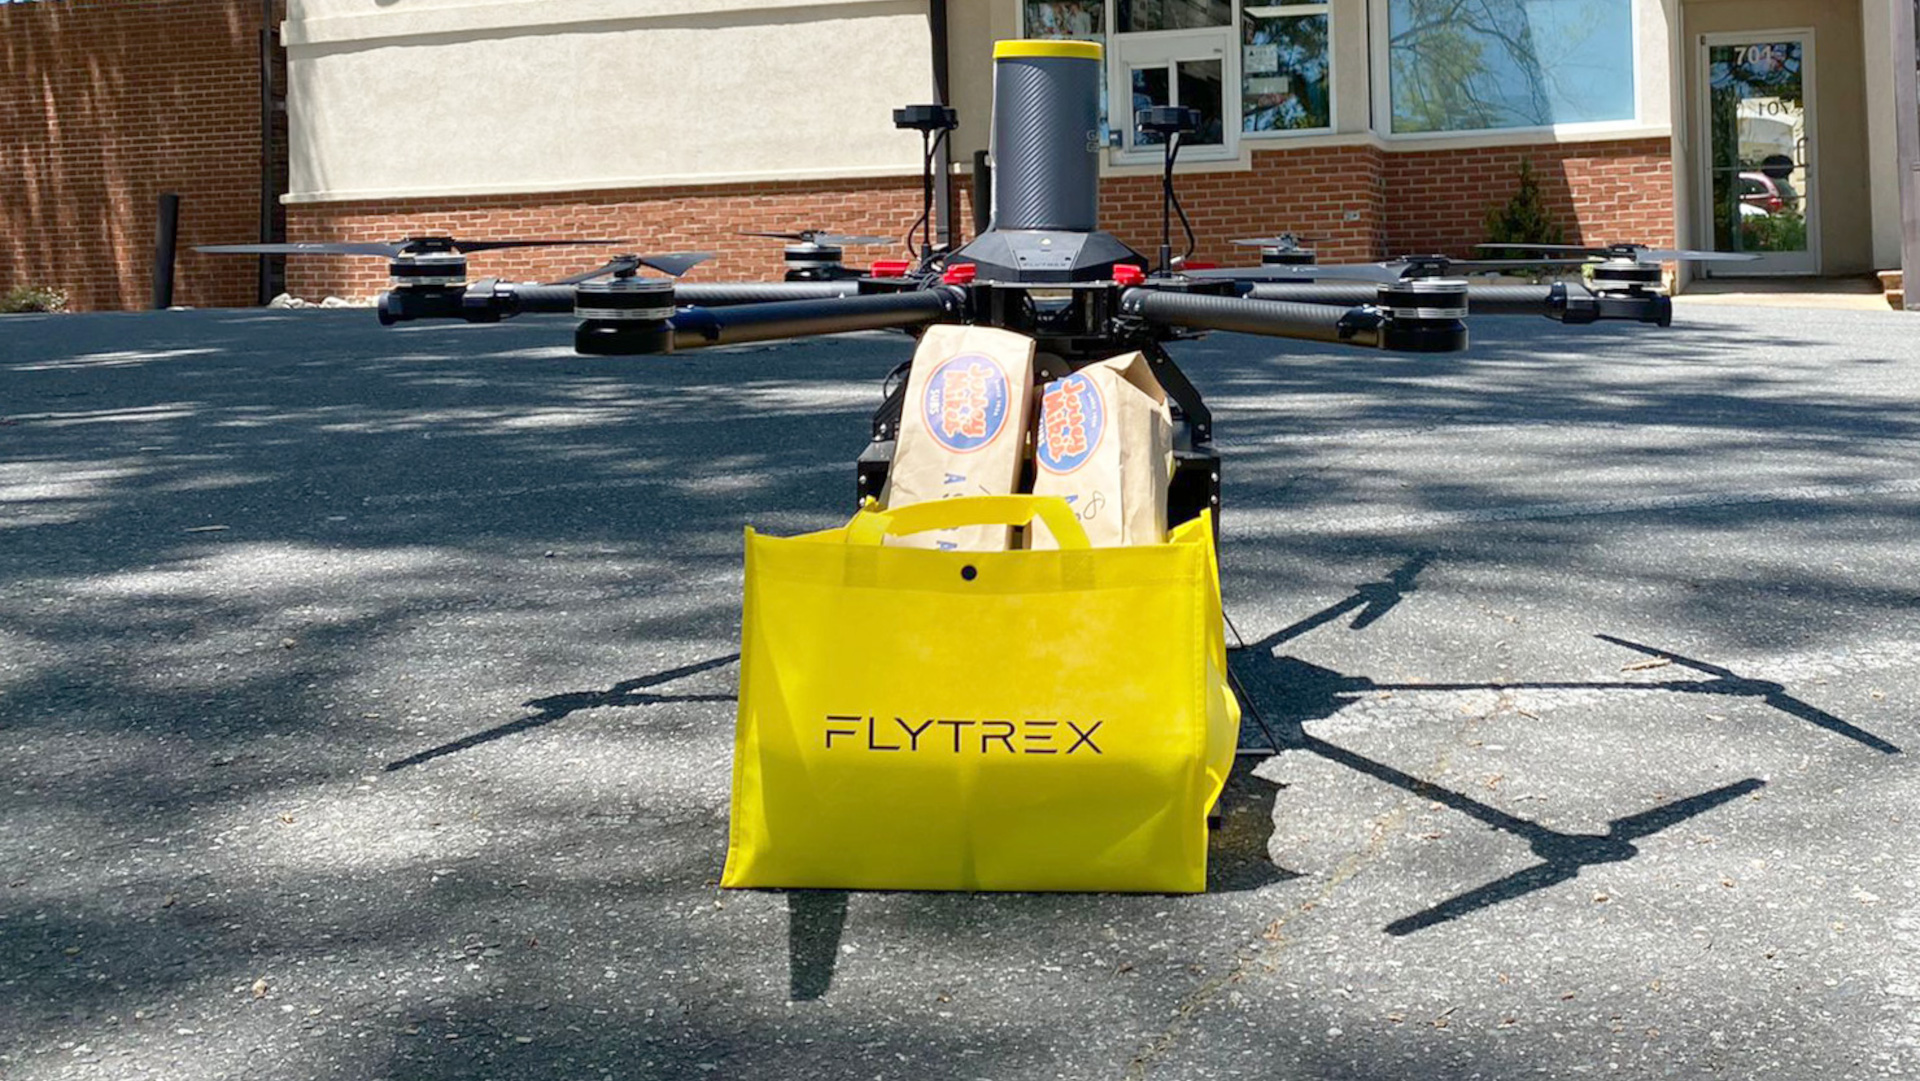 Jersey Mike's sub with Flytrex drone